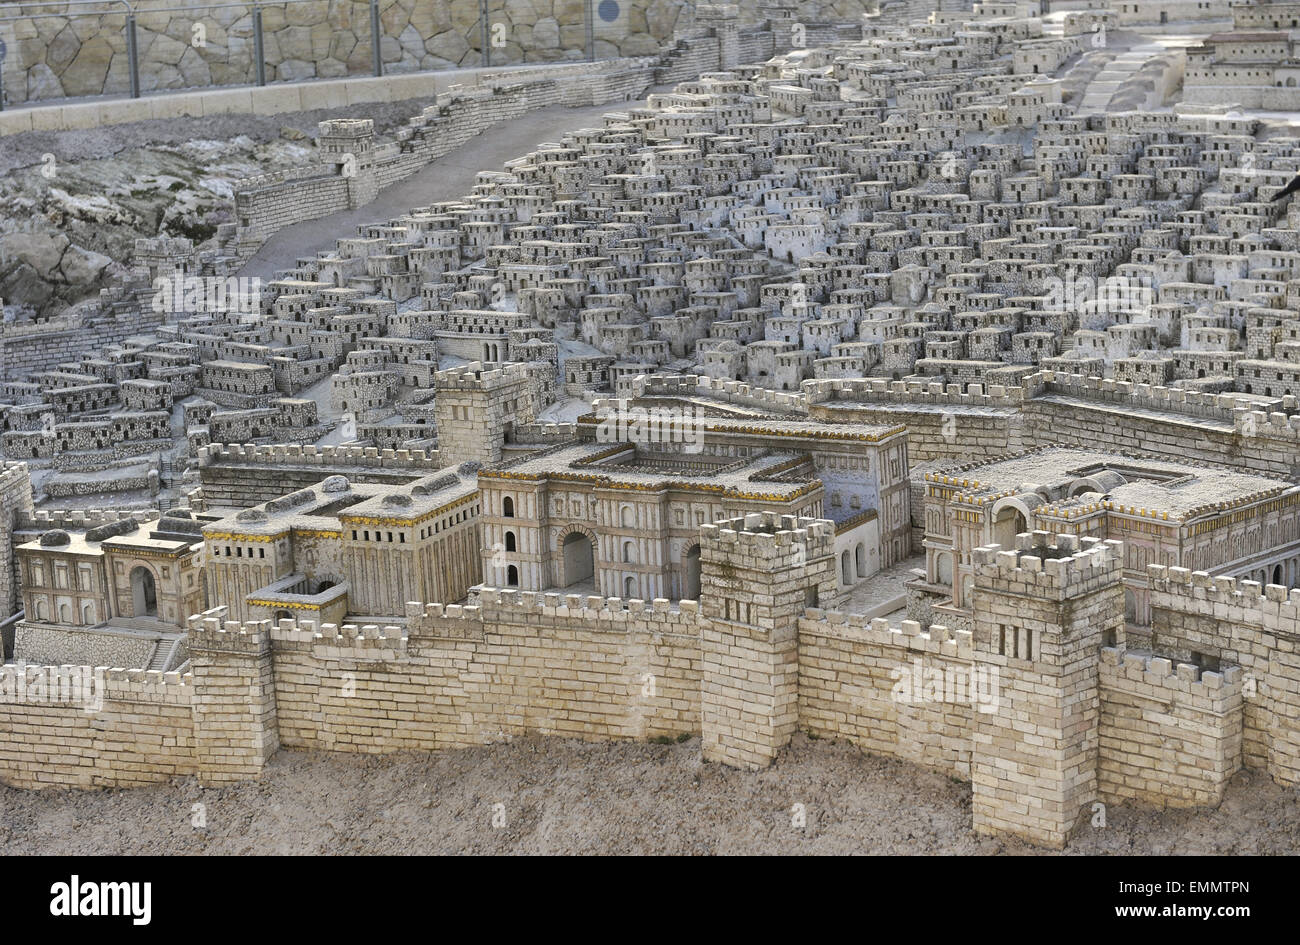 Model of the city of Jerusalem and the so-called Second Temple destroyed by the Romans in 70 AD. Israel. Scale 1:50. Stock Photo